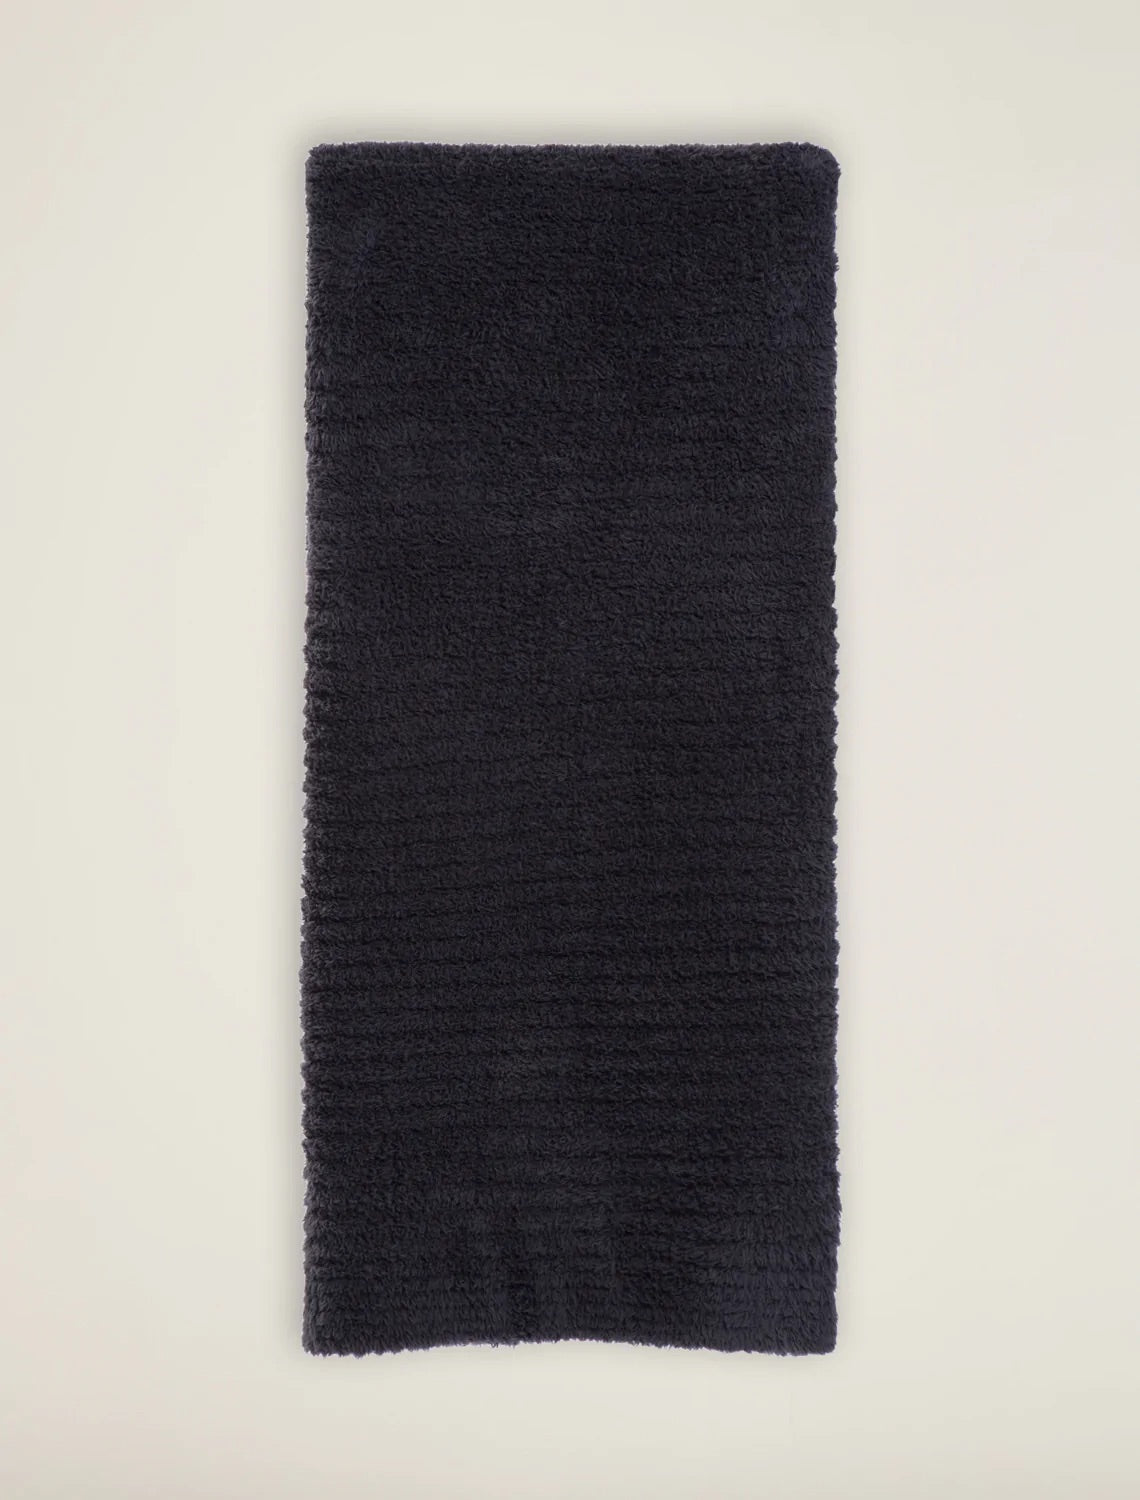 Carbon CozyChic Ribbed Throw Blanket